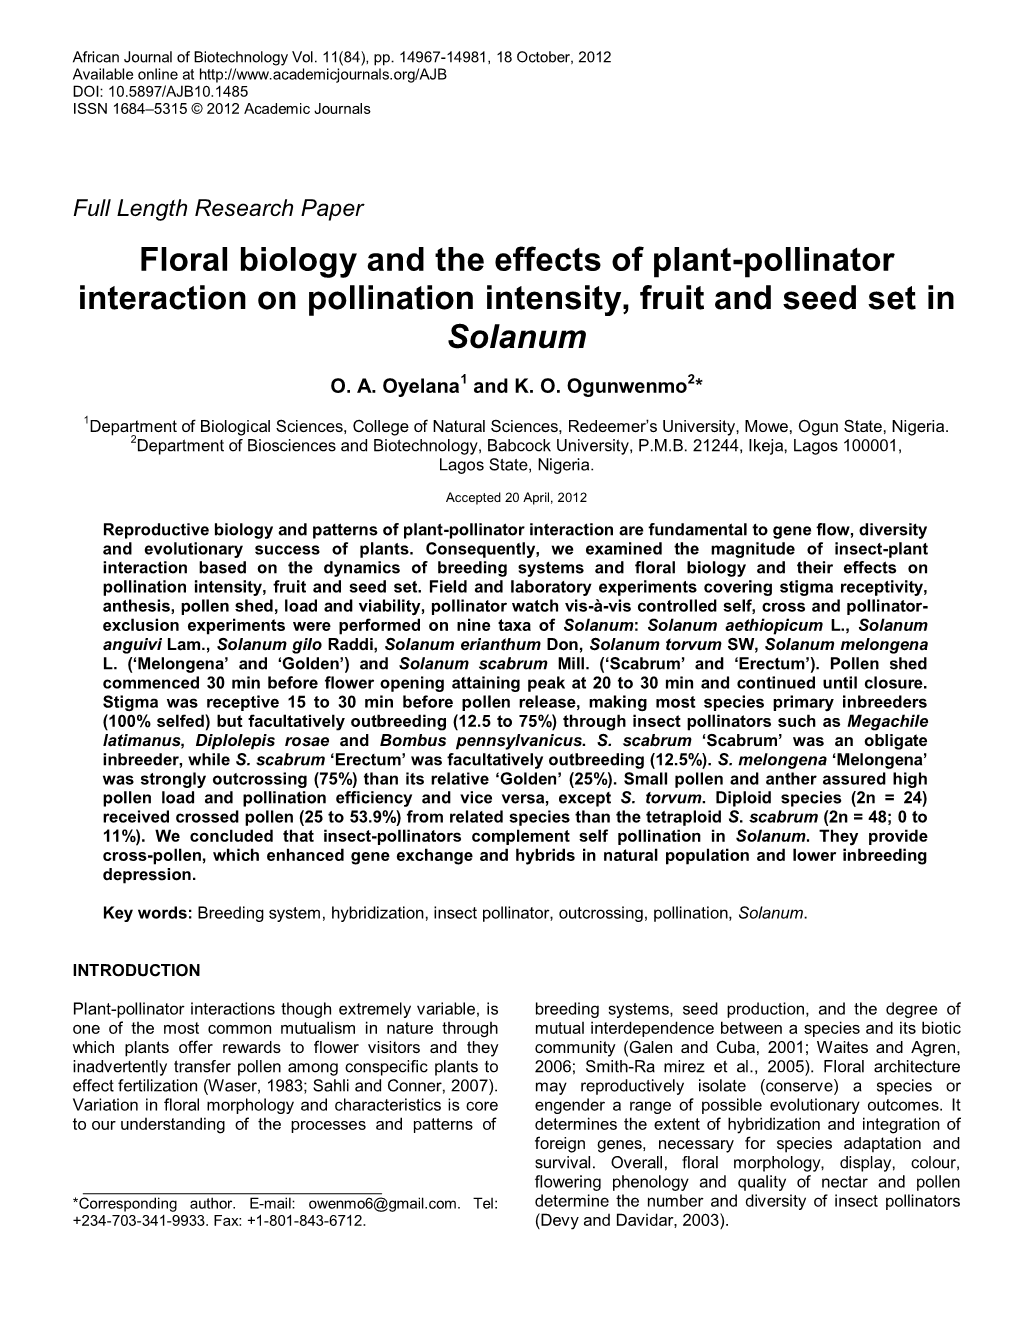 Floral Biology and the Effects of Plant-Pollinator Interaction on Pollination Intensity, Fruit and Seed Set in Solanum